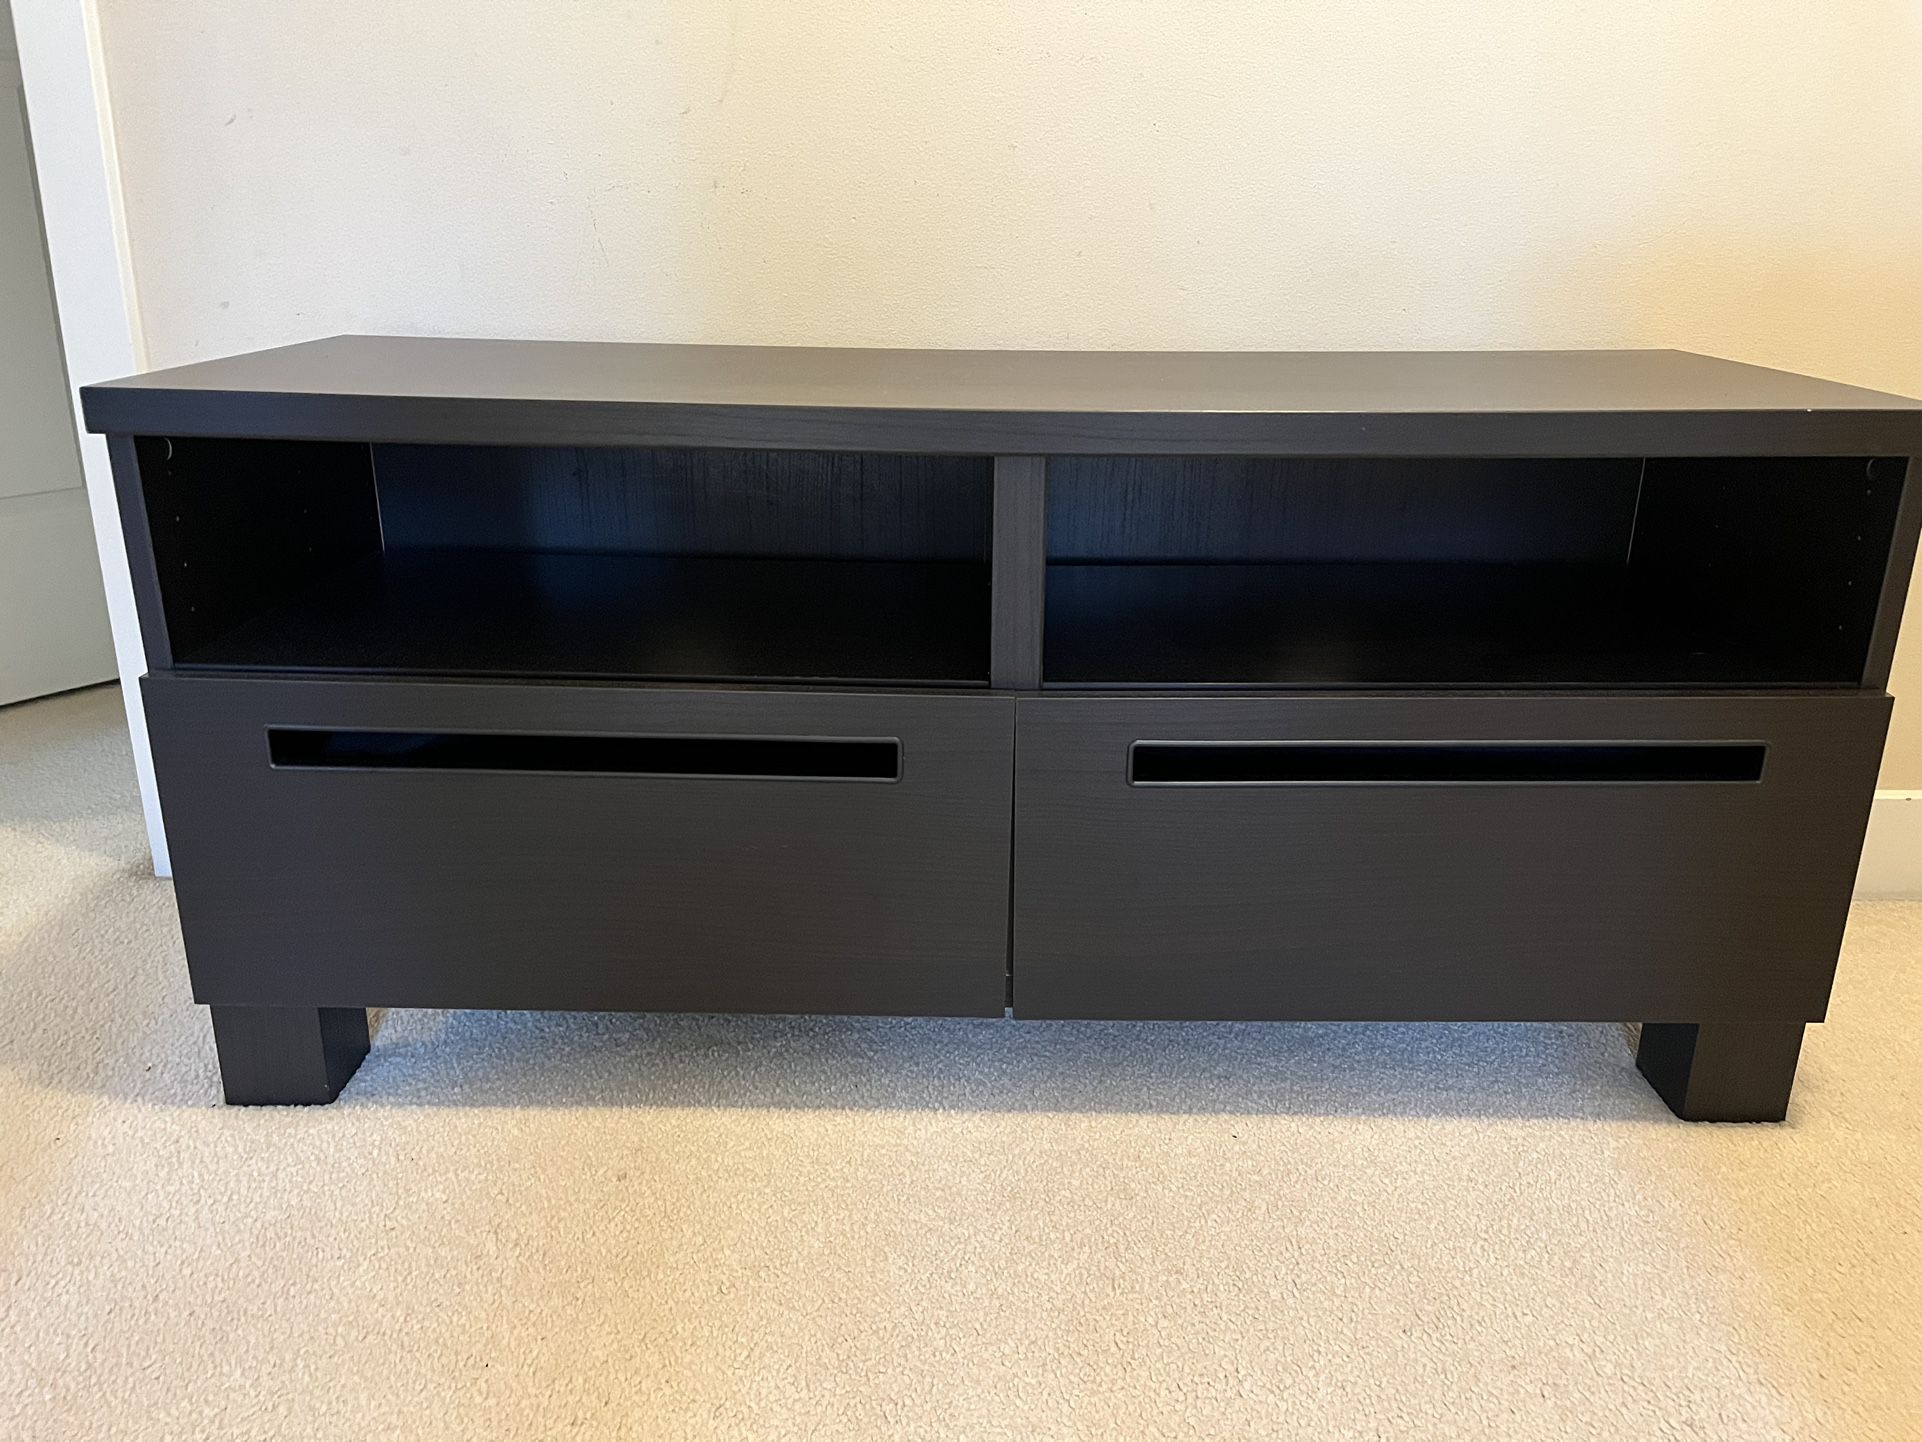 TV Stand with Storage Drawers PENDING SALE